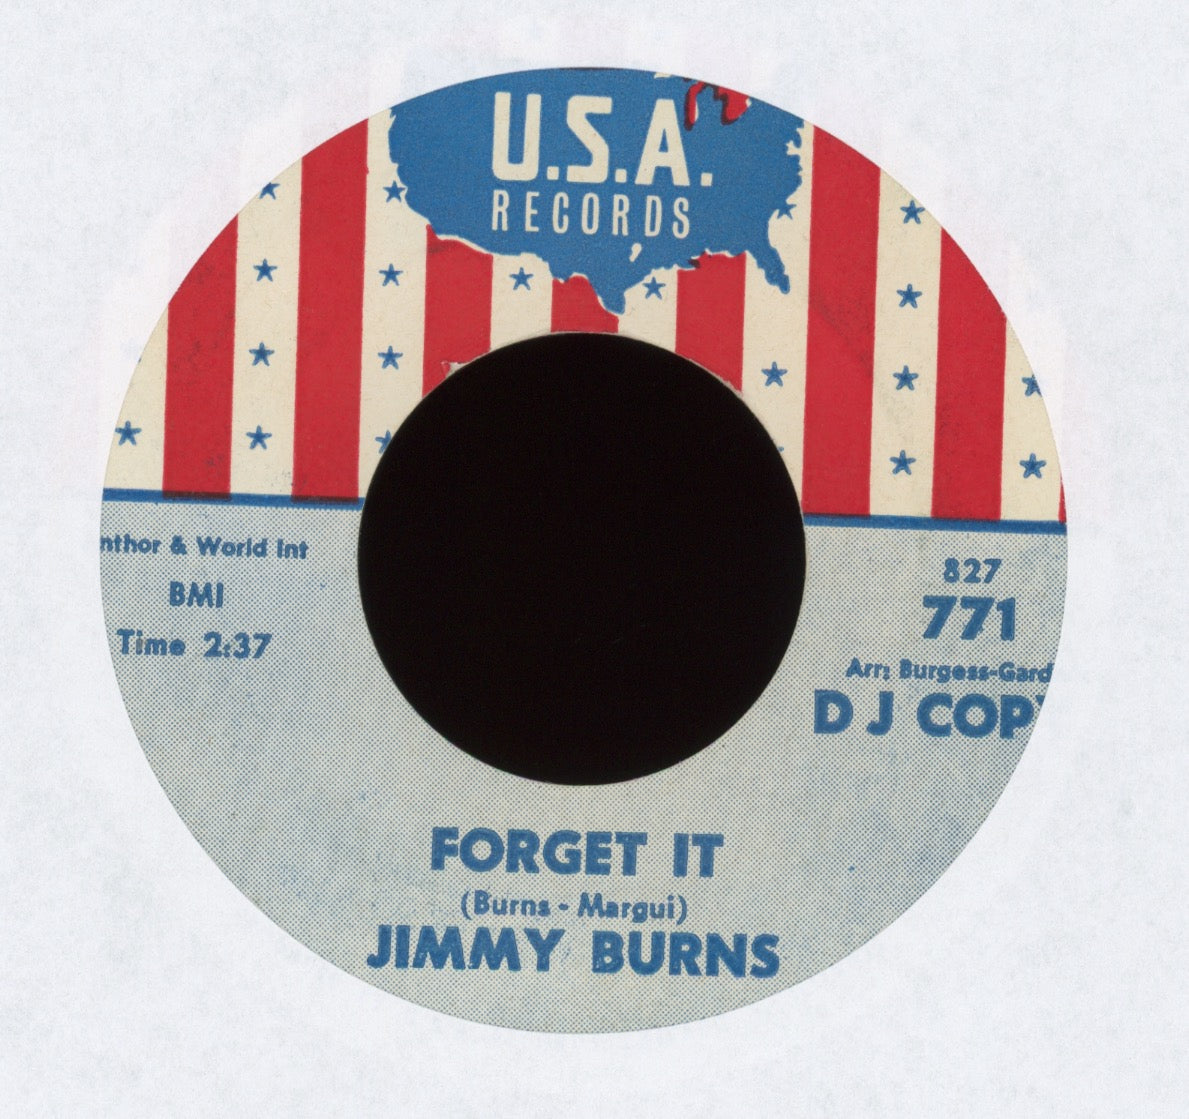 Jimmy Burns - Forget It on U.S.A. Promo